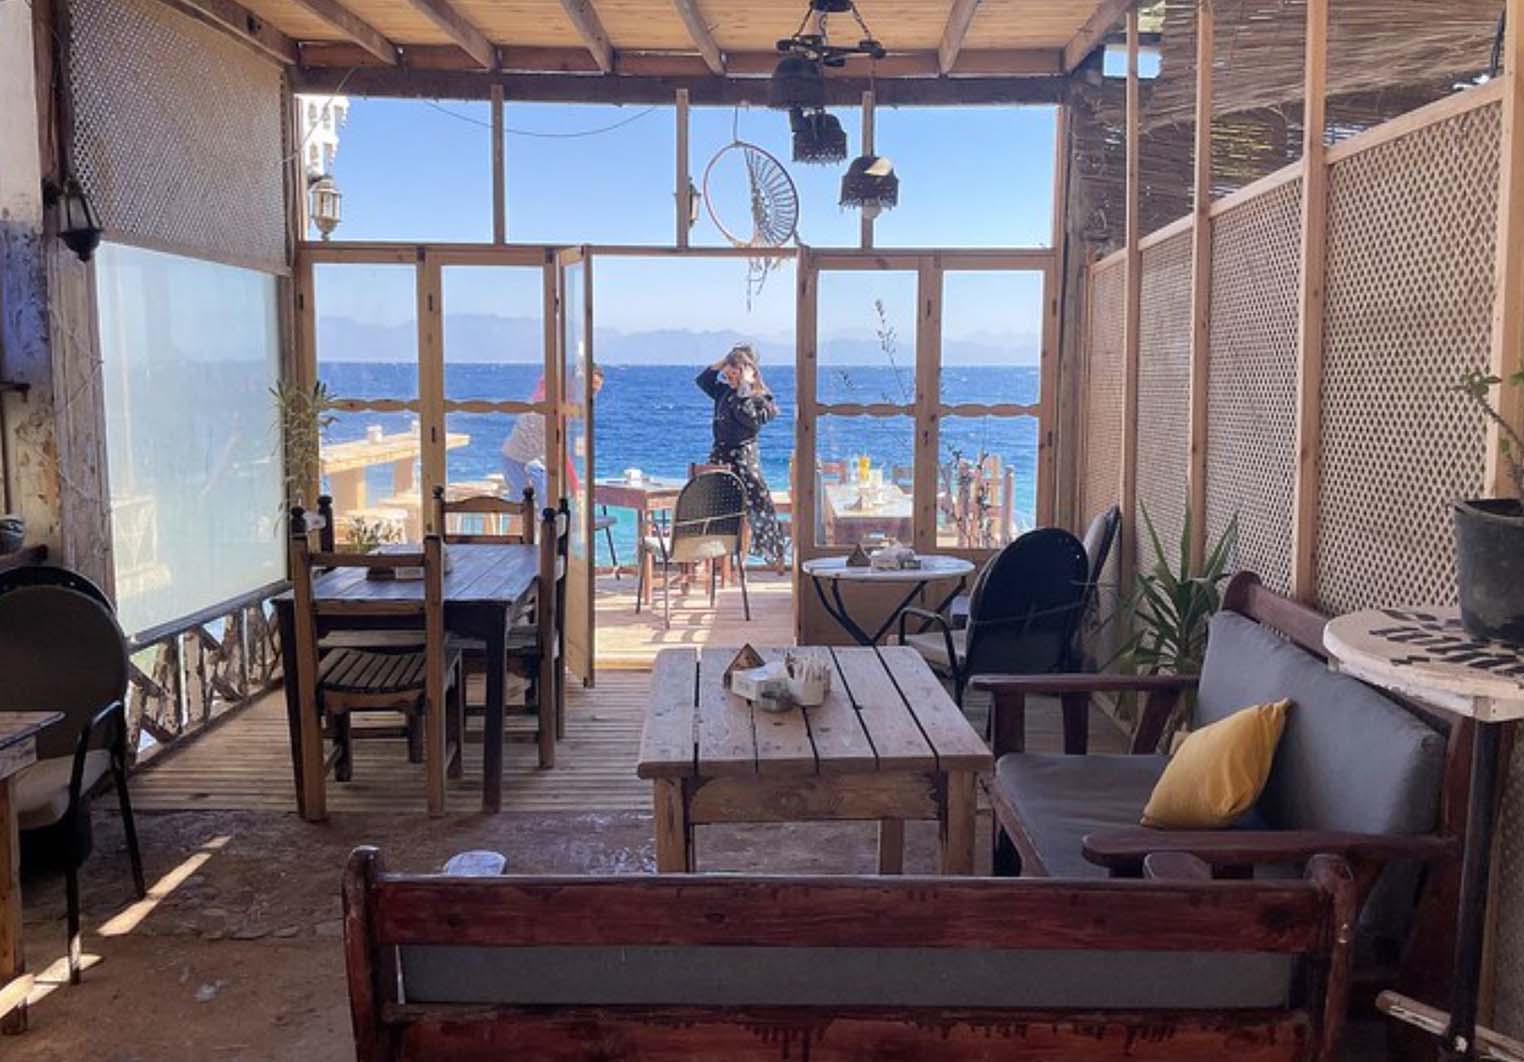 The best coffee shop in Egypt, Dahab.